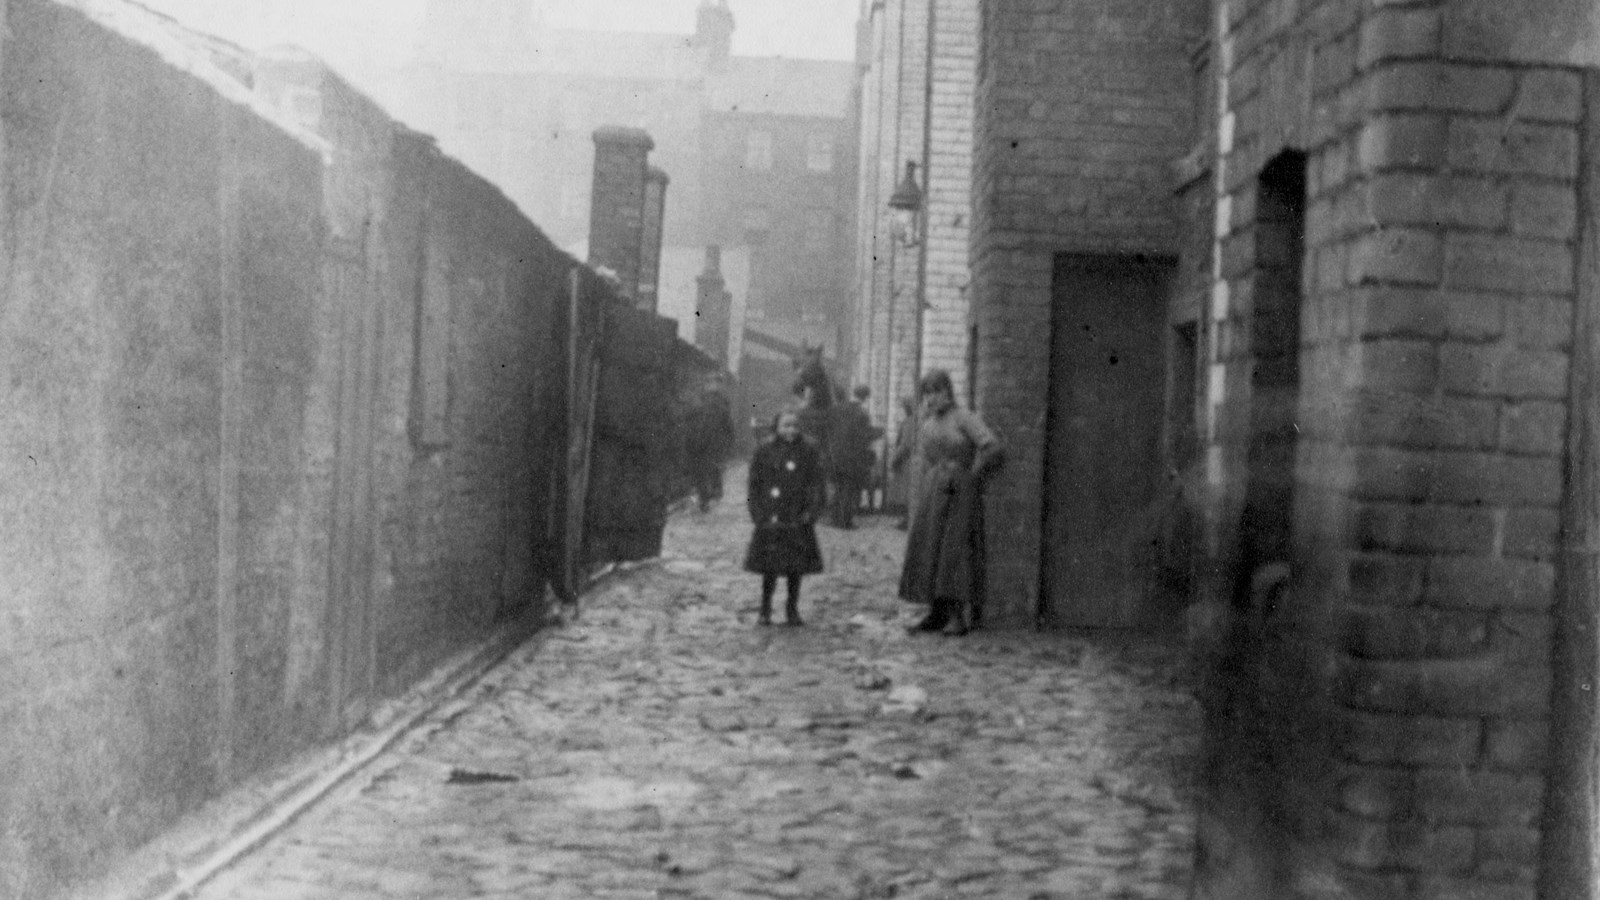 A black and white photograph of adults, children and horses in an alleyway between high brick buildings and a fence.